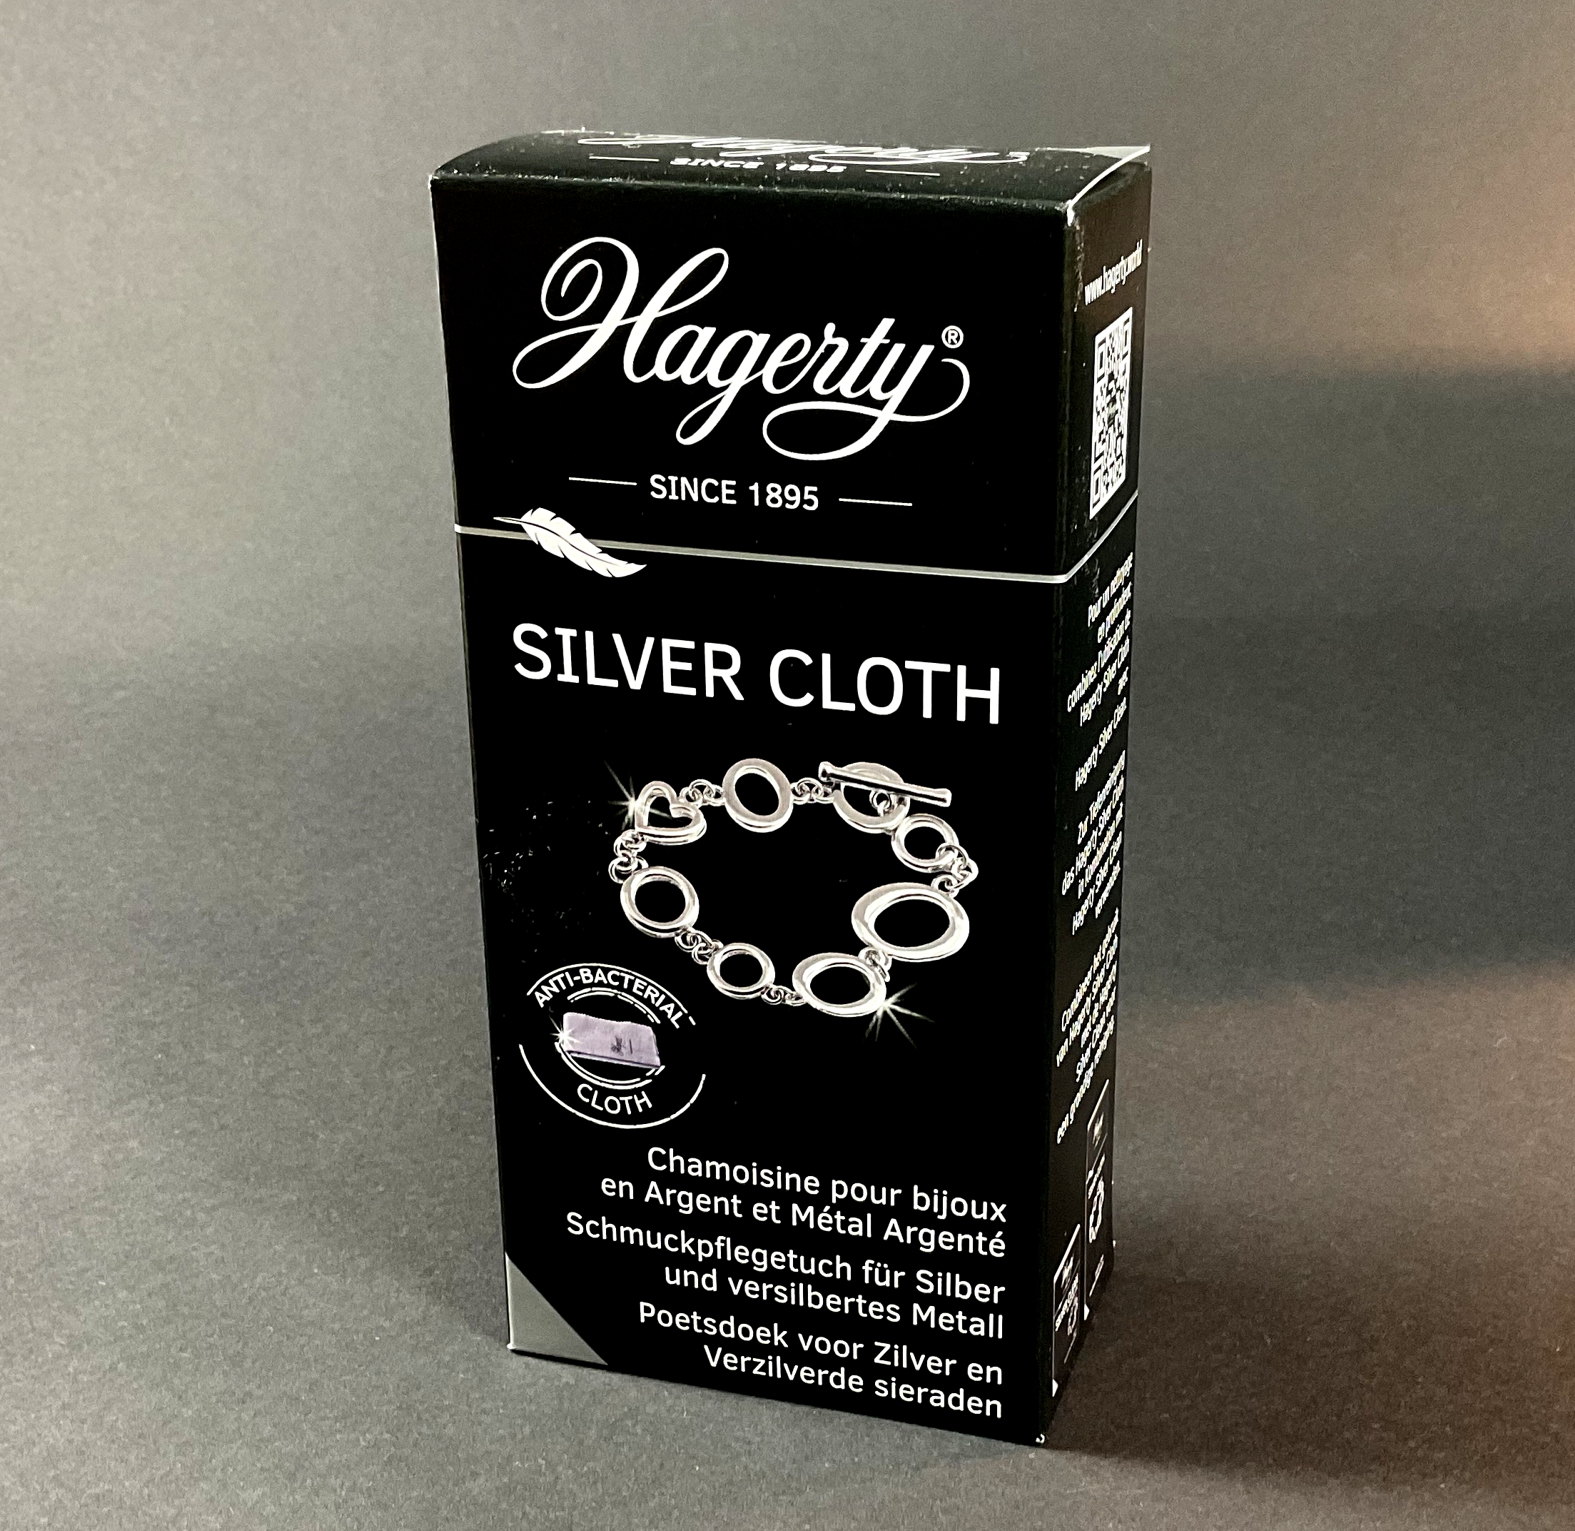 Hagerty Silver Cloth Silberpflegetuch